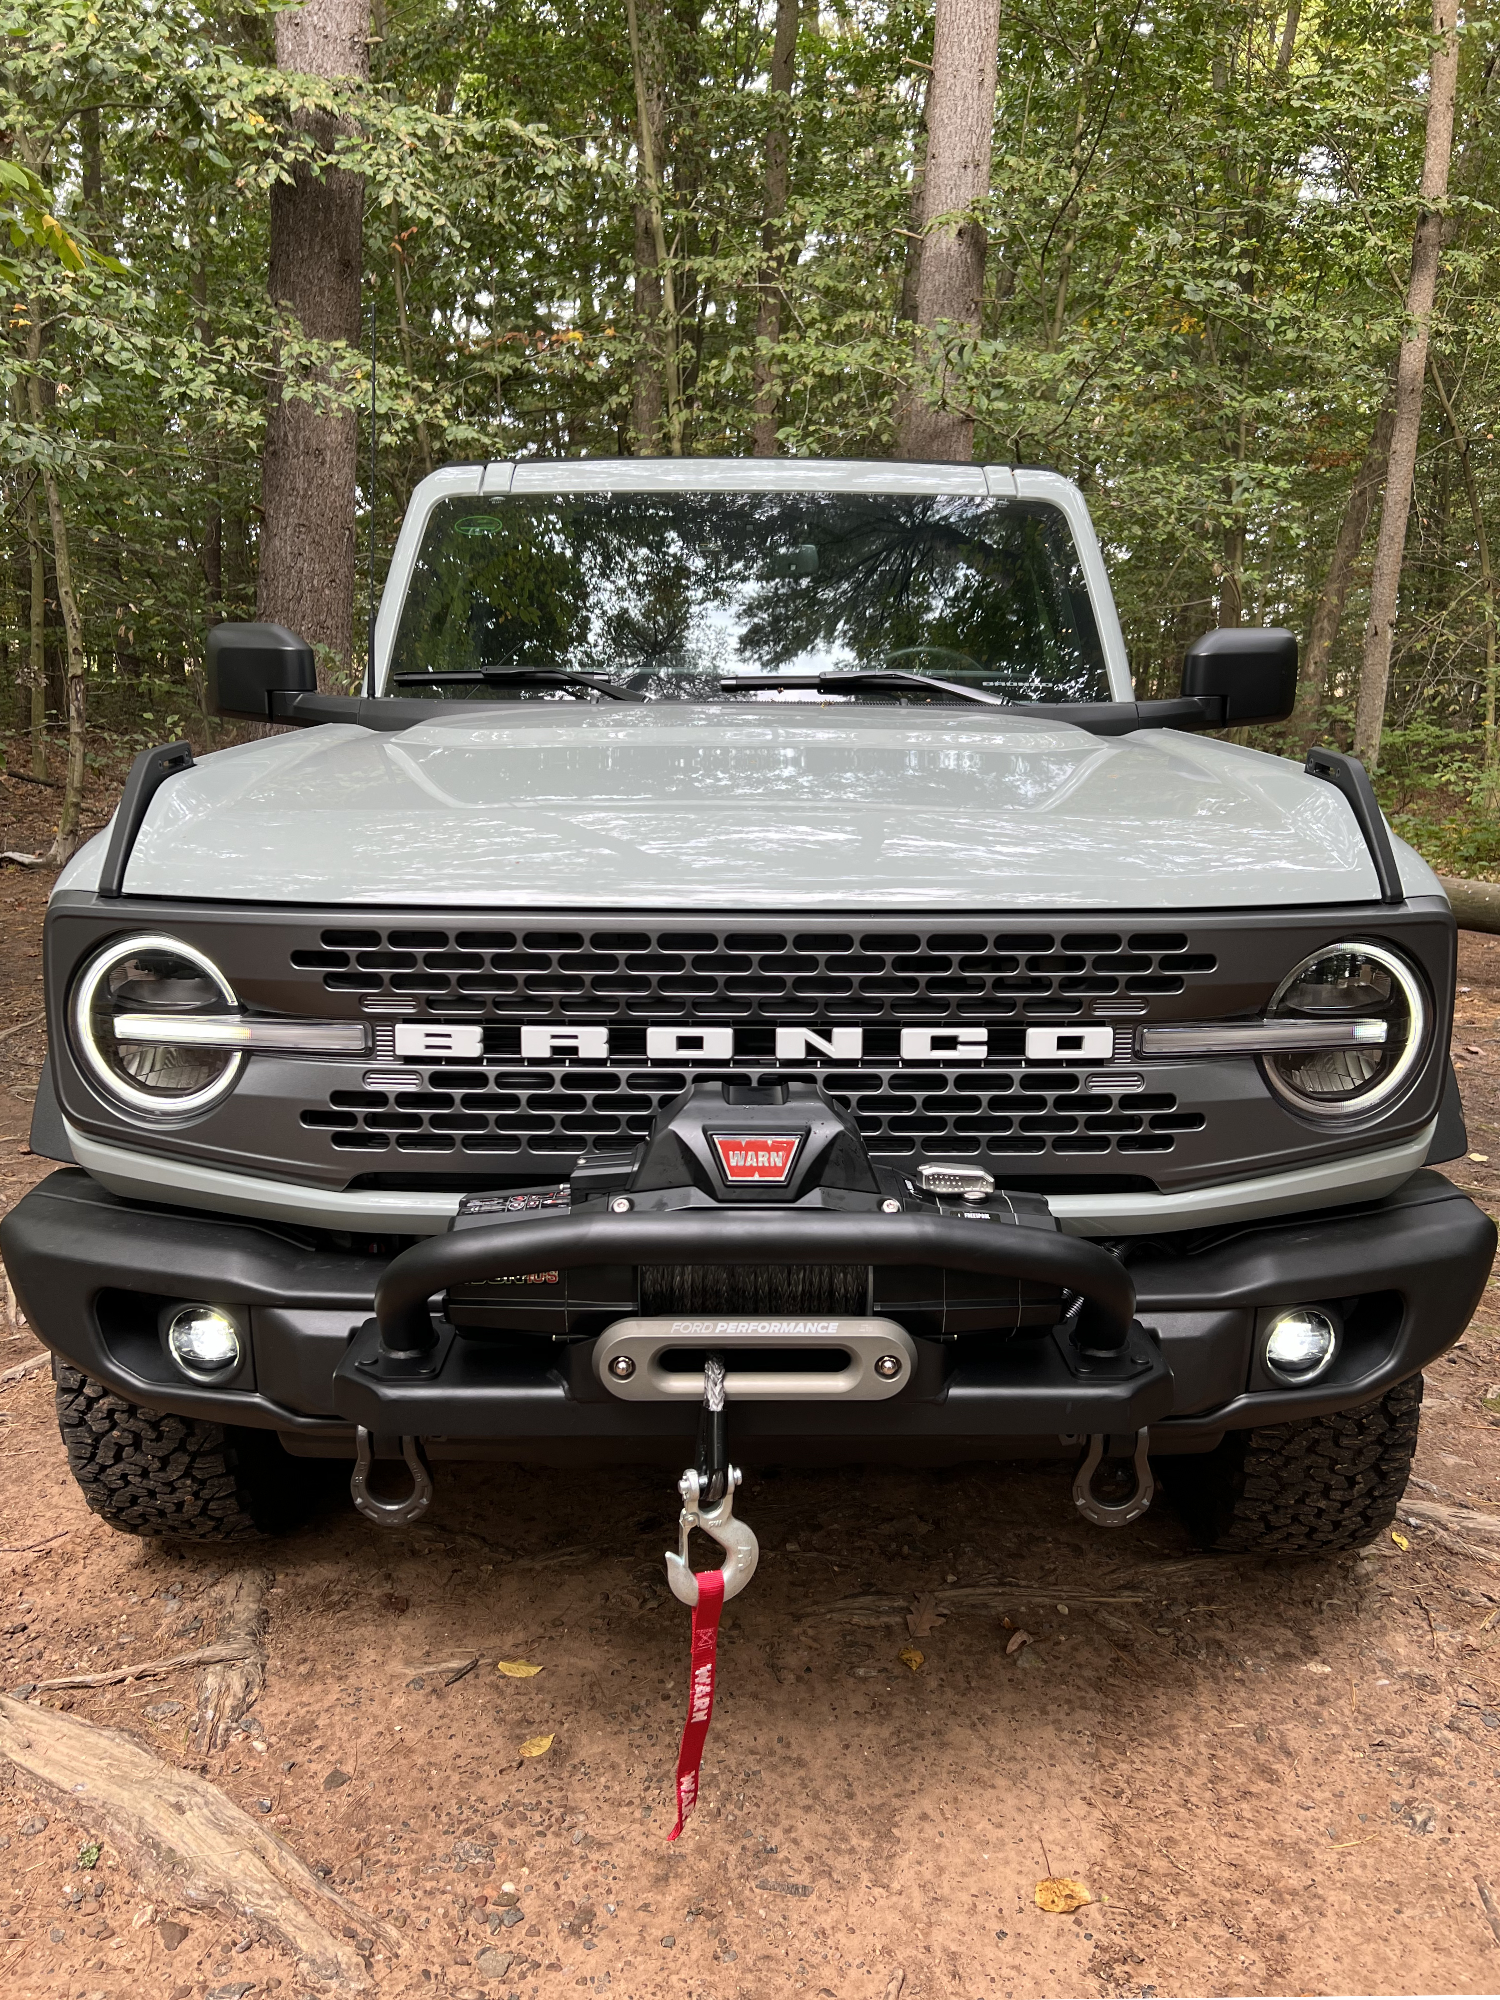 Ford Bronco Ford Performance WARN winch on capable bumper — Yes it's possible! ForumImg1